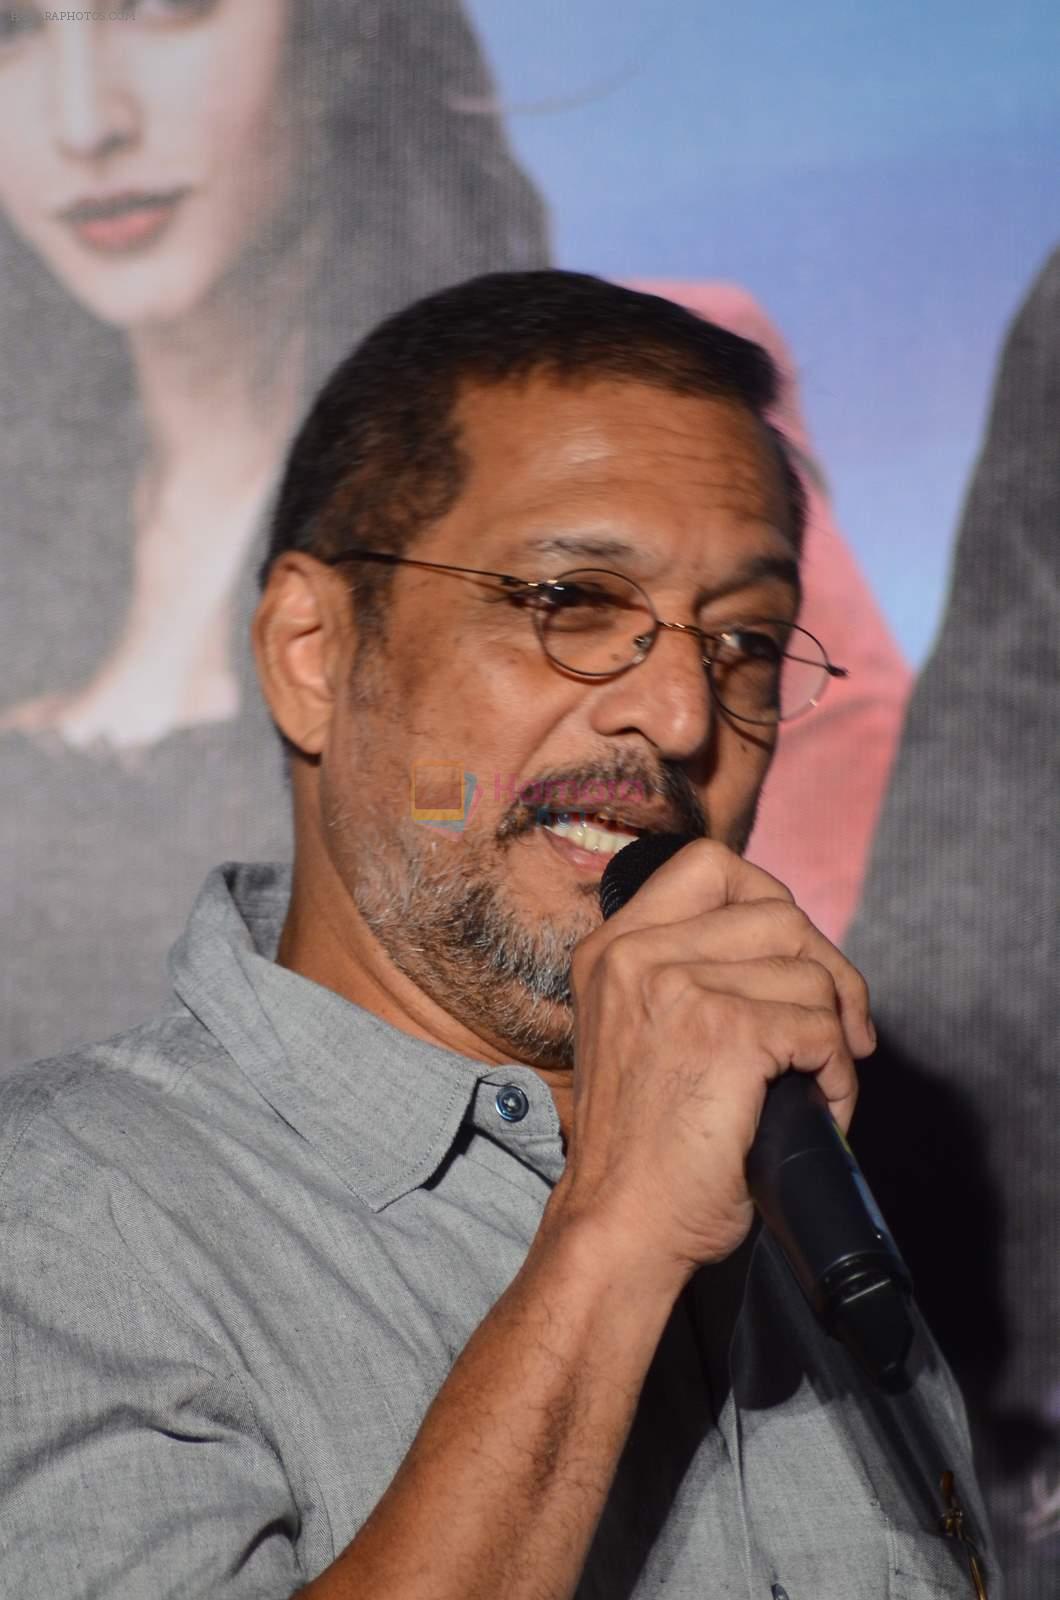 Nana Patekar at Welcome Back title song launch in Mumbai on 8th Aug 2015